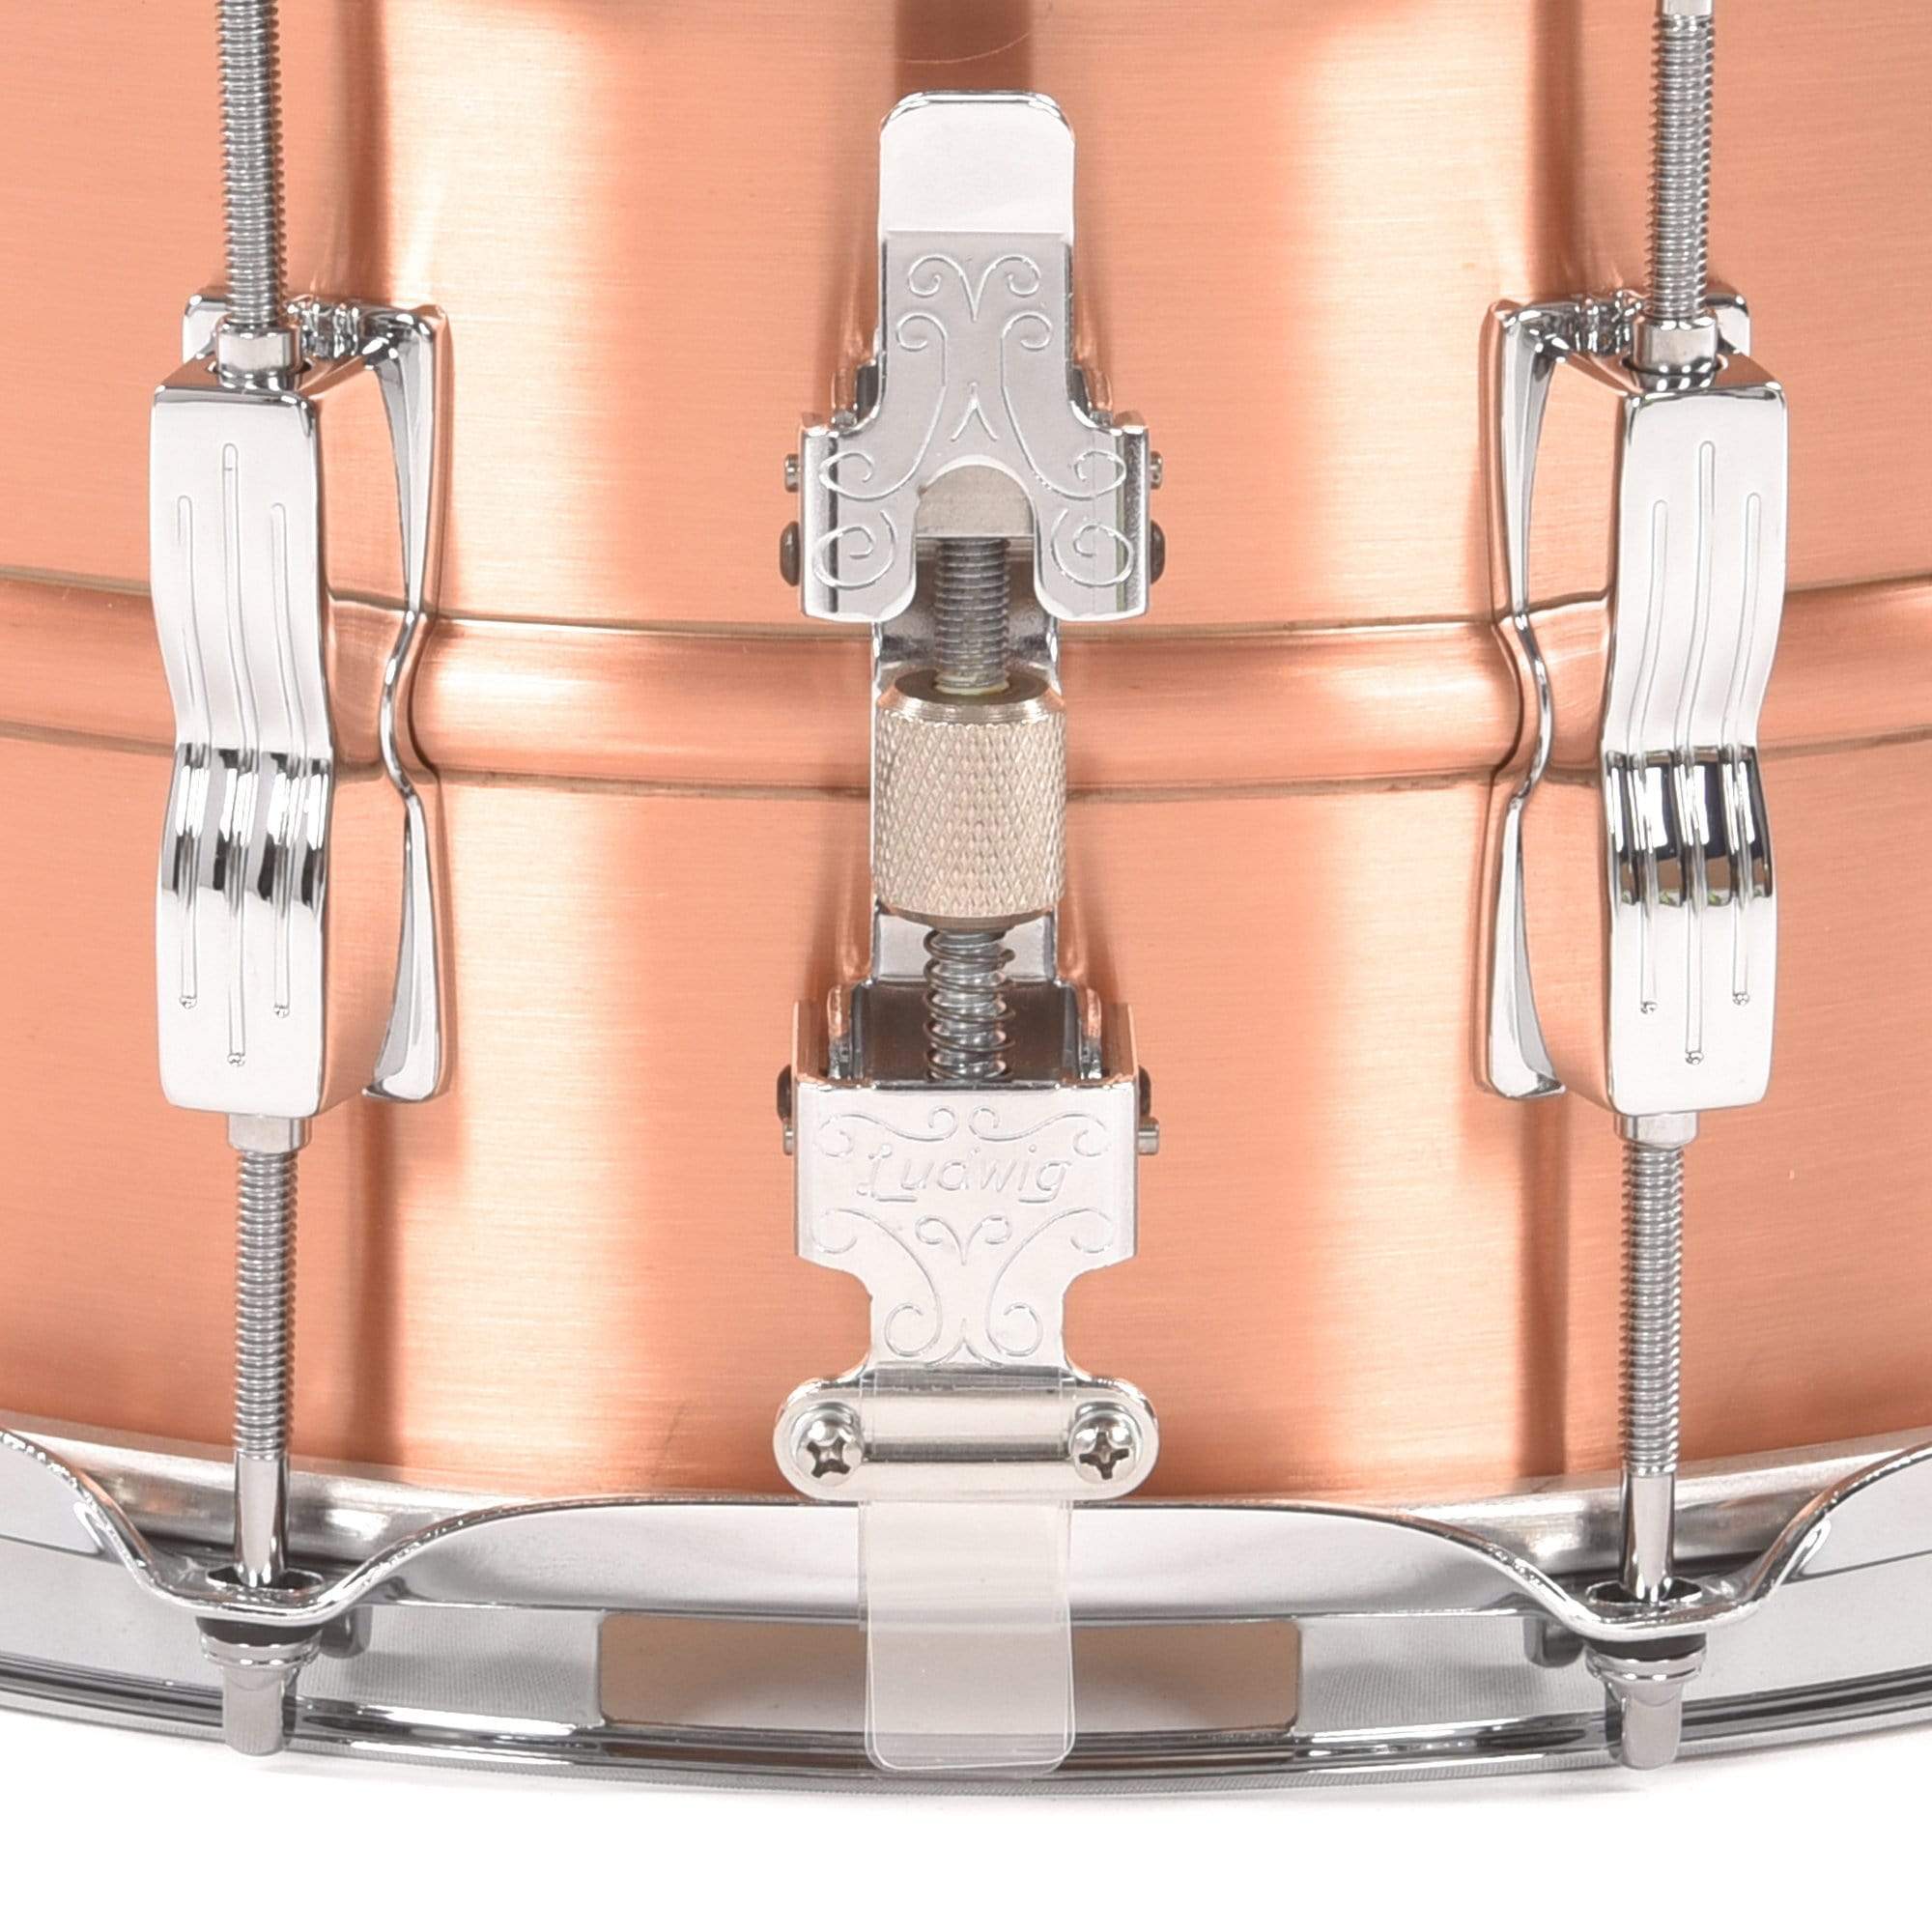 Ludwig 6.5x14 Acro Brushed Copper Snare Drum Drums and Percussion / Acoustic Drums / Snare